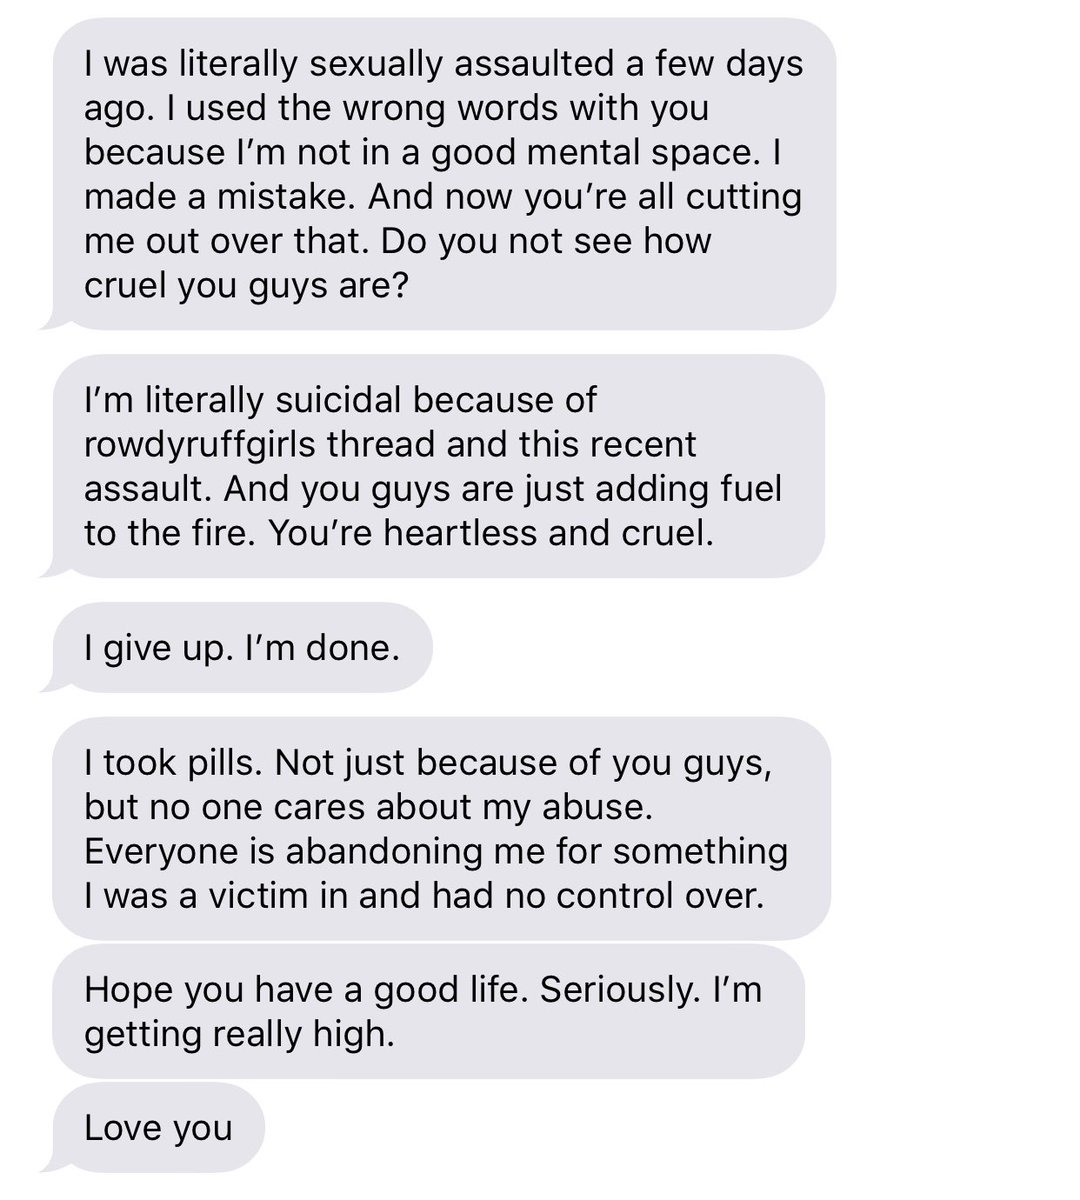 this was all in a matter of minutes. (the sexual assault mention in the first screenshot was not about espi, but another person i don’t know, apparently, that i again had no idea about until he mentioned in that moment.) cw: suicide/manipulation